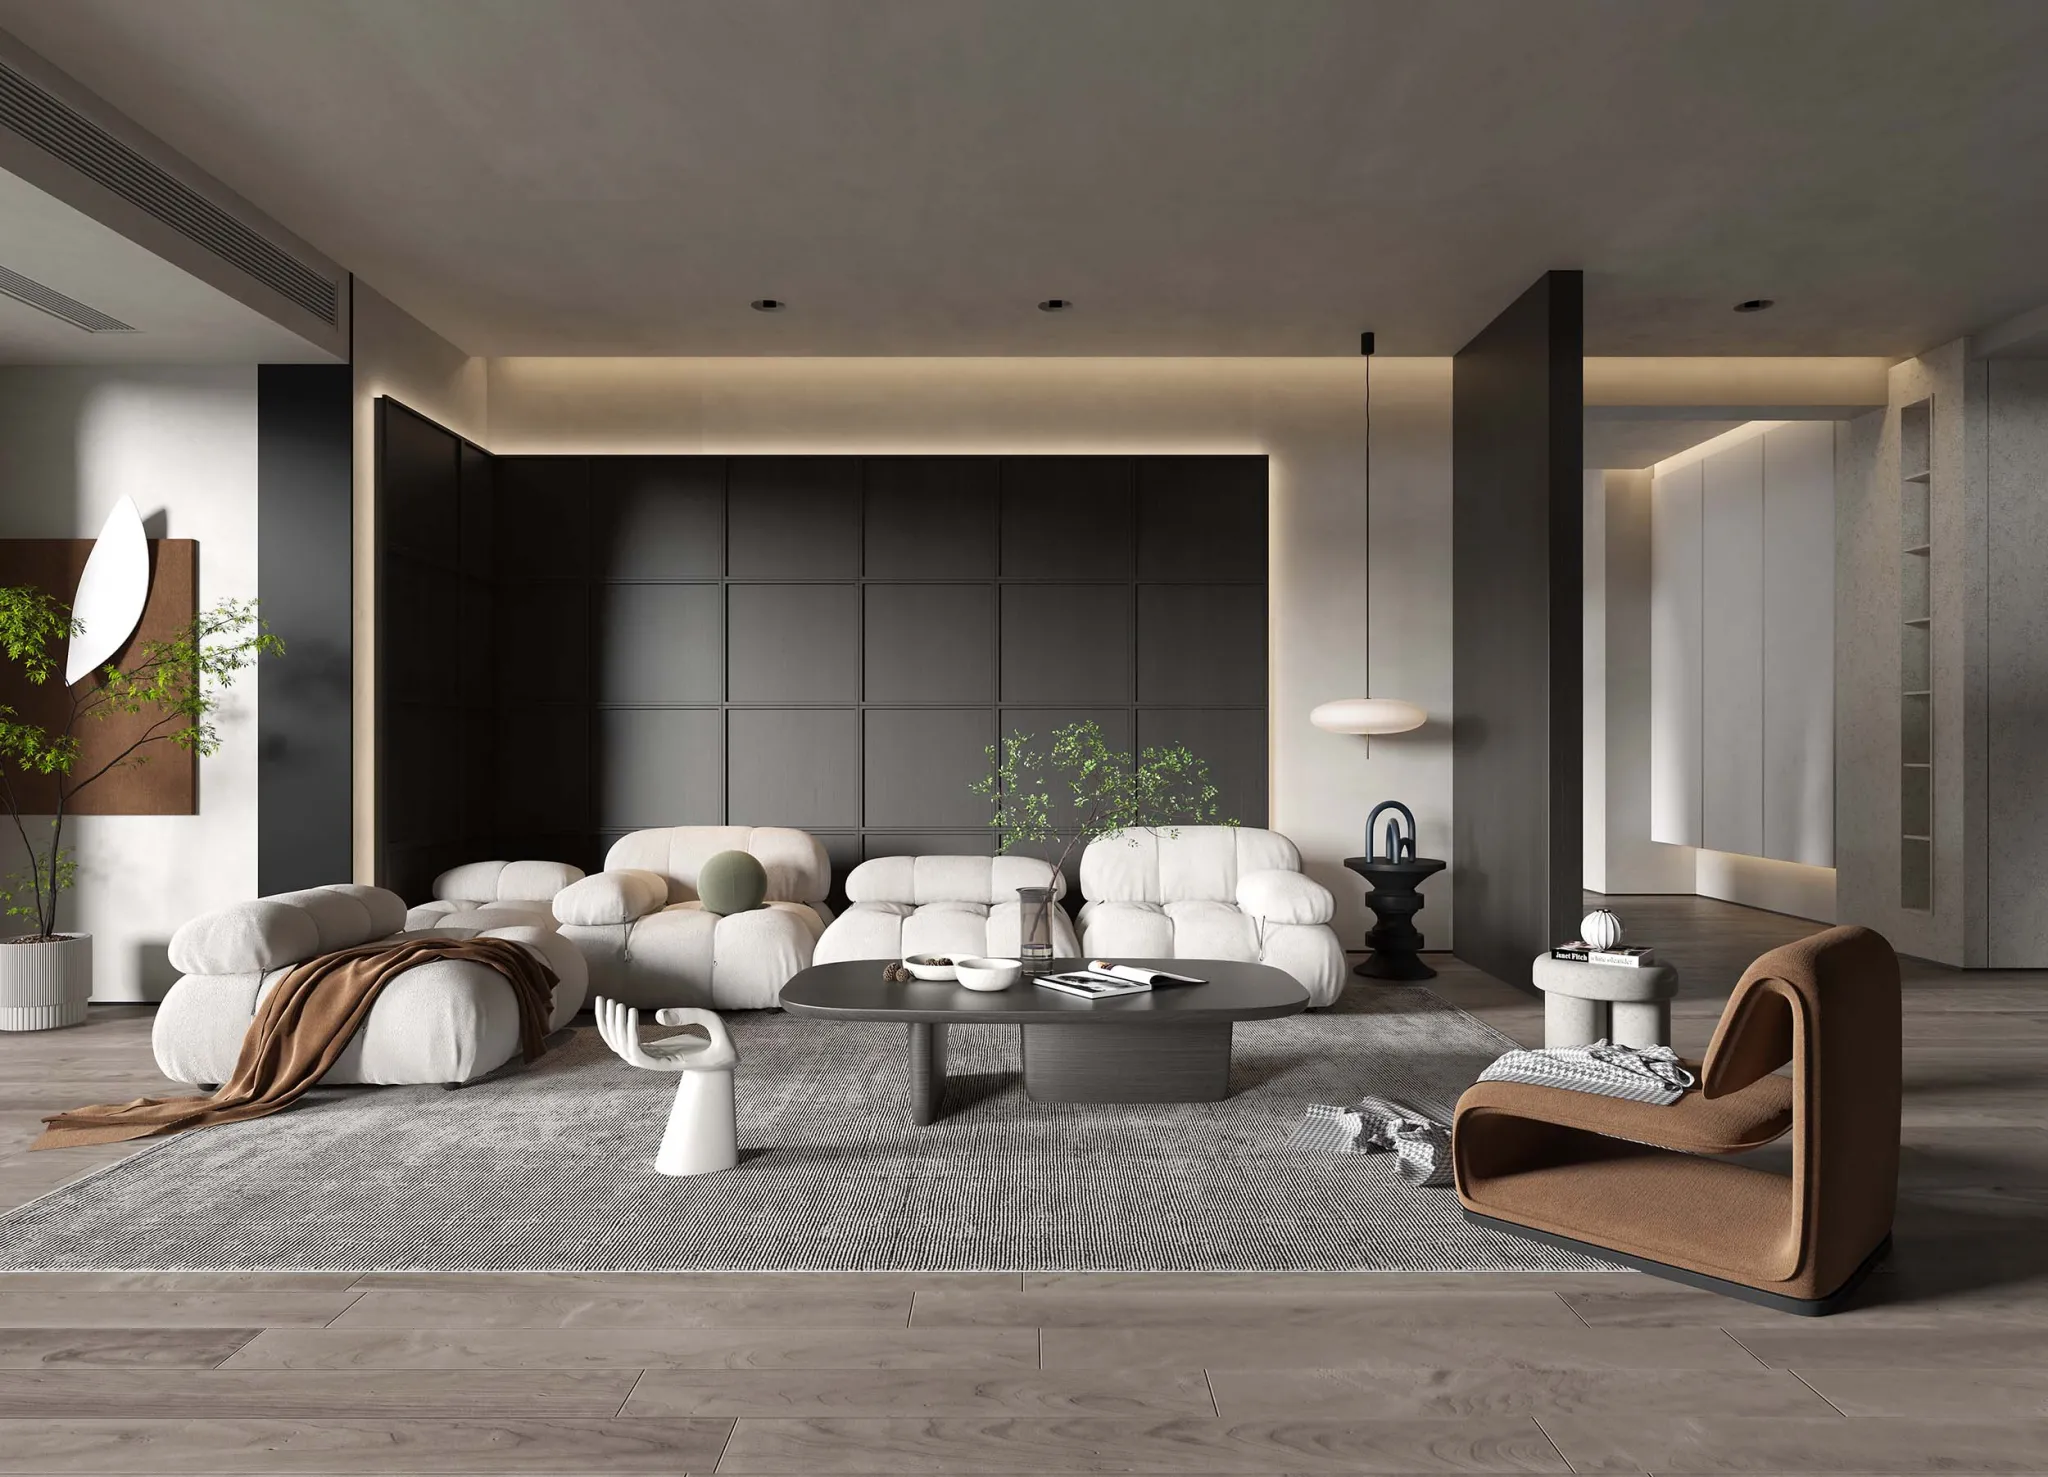 HOUSE SPACE 3D SCENES – LIVING ROOM – 0104